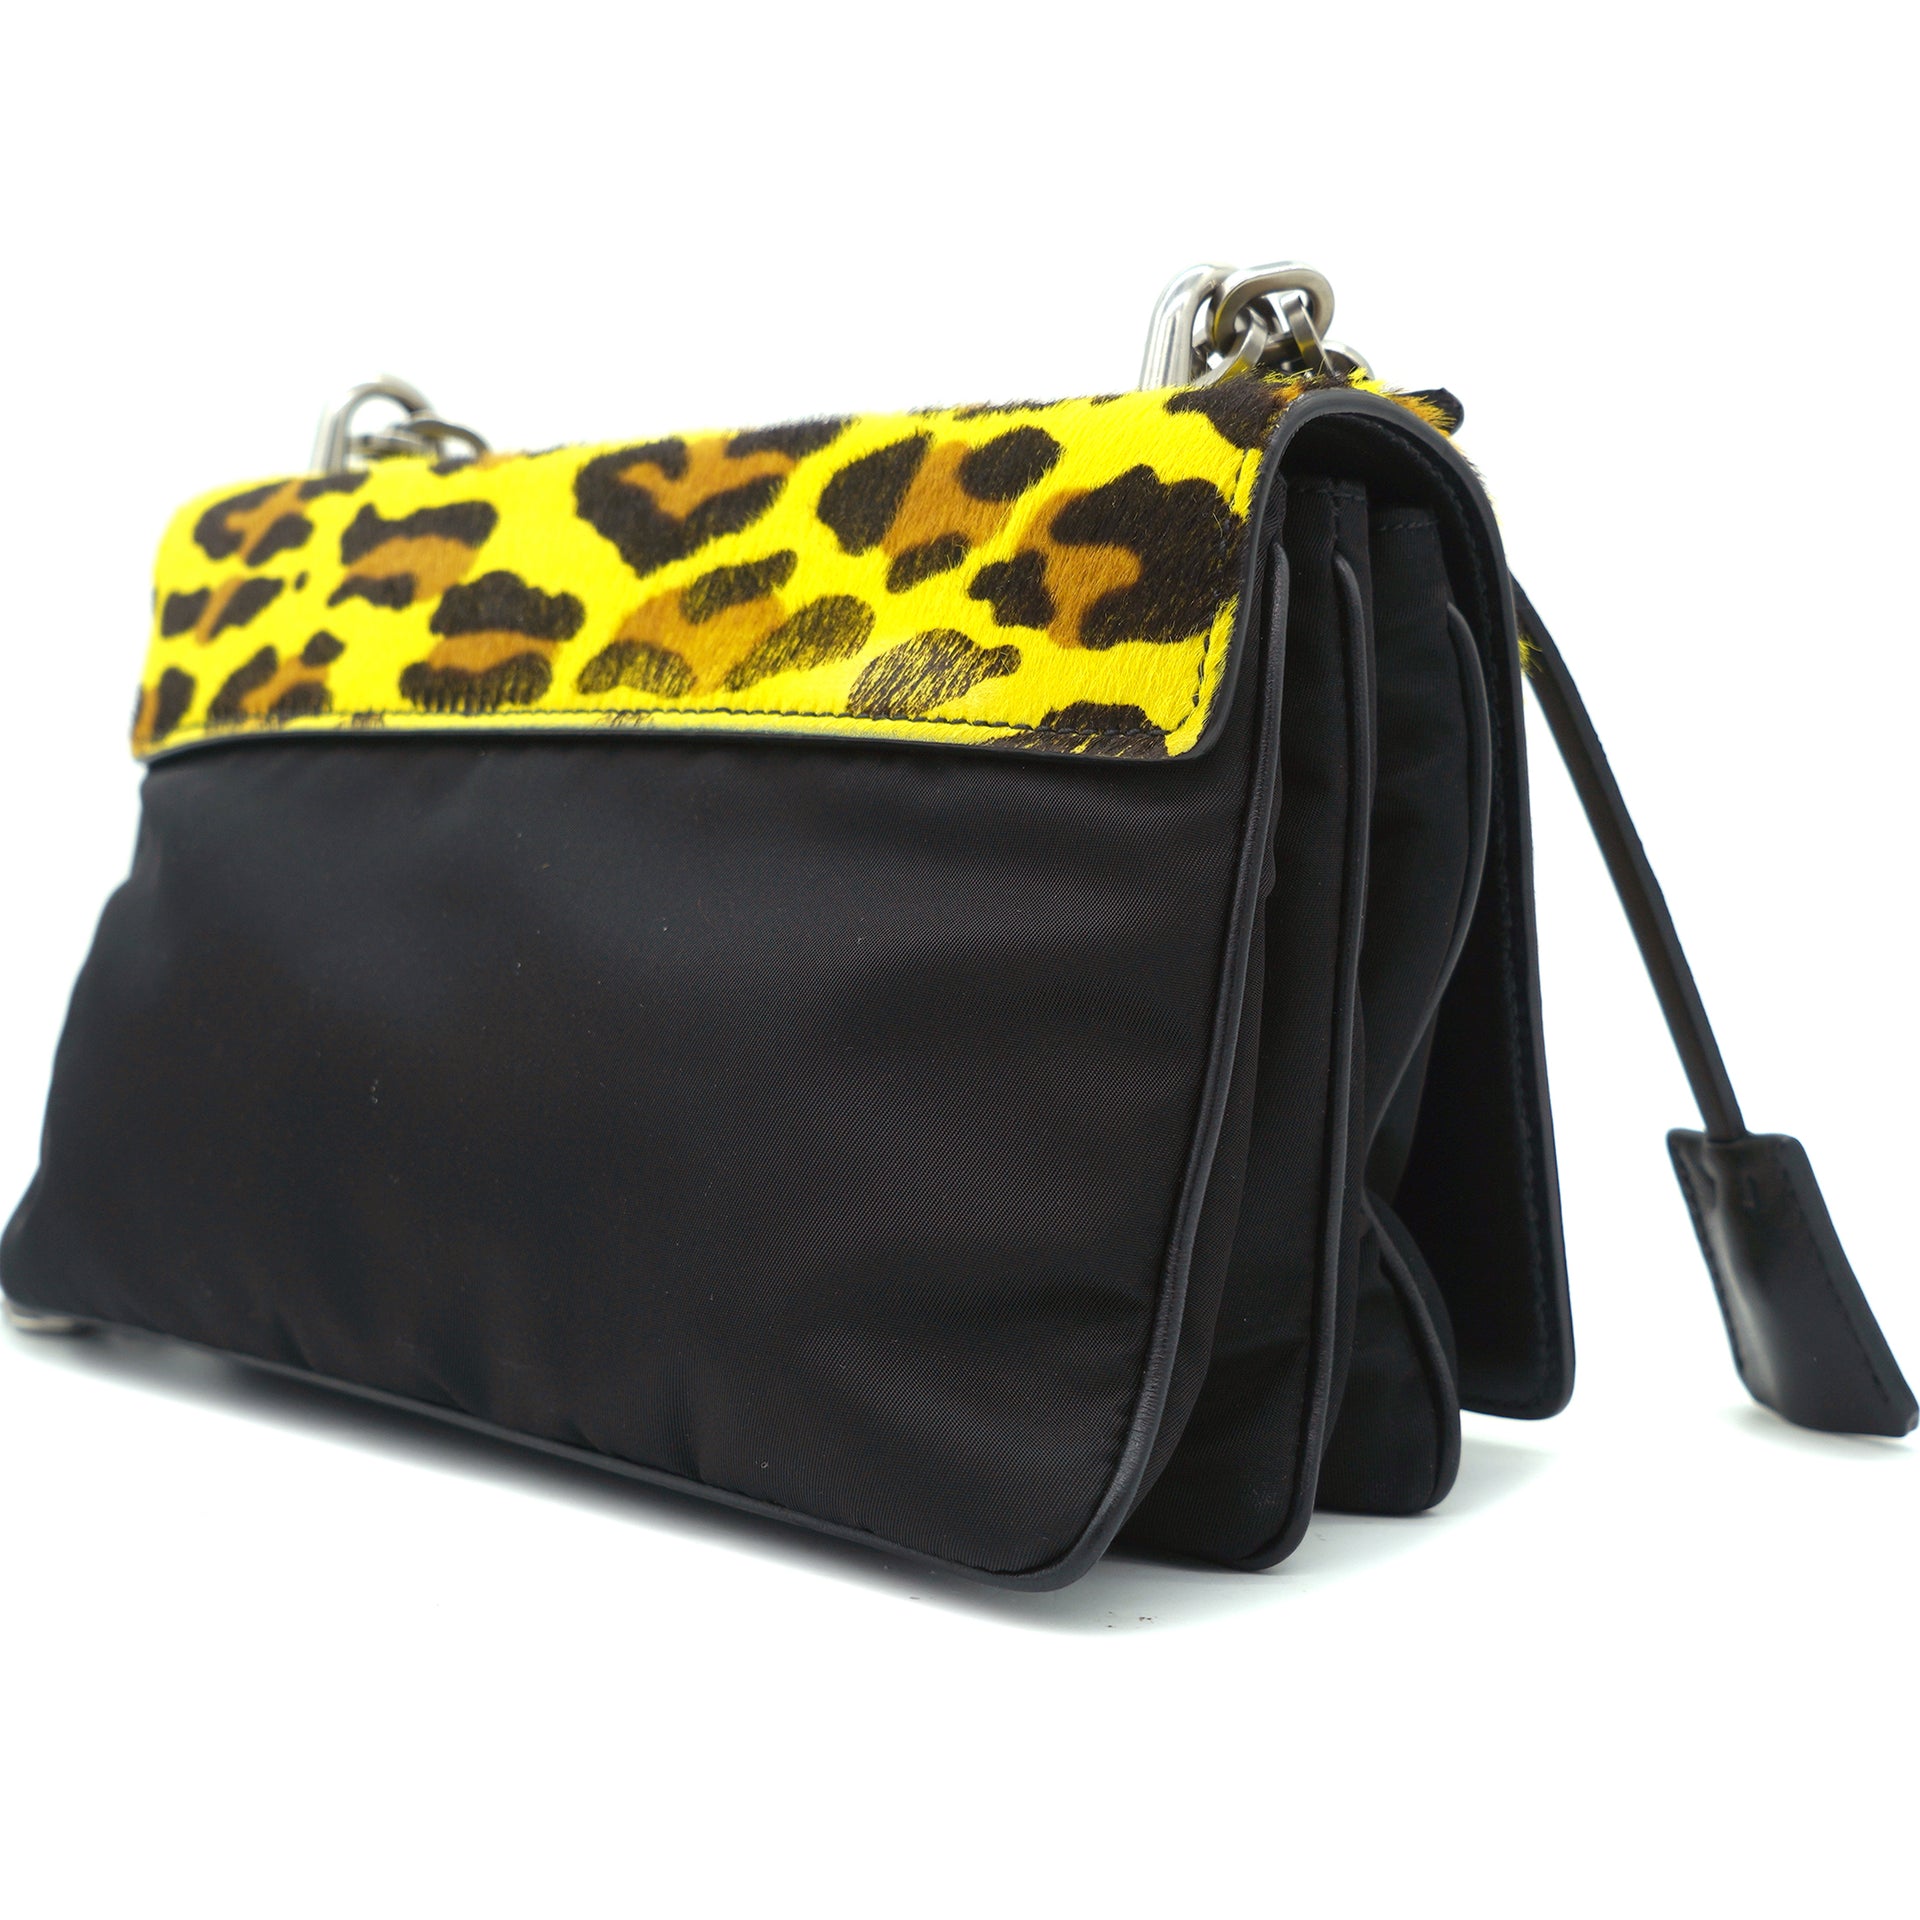 Cavallino and Glace Flap Bag Black